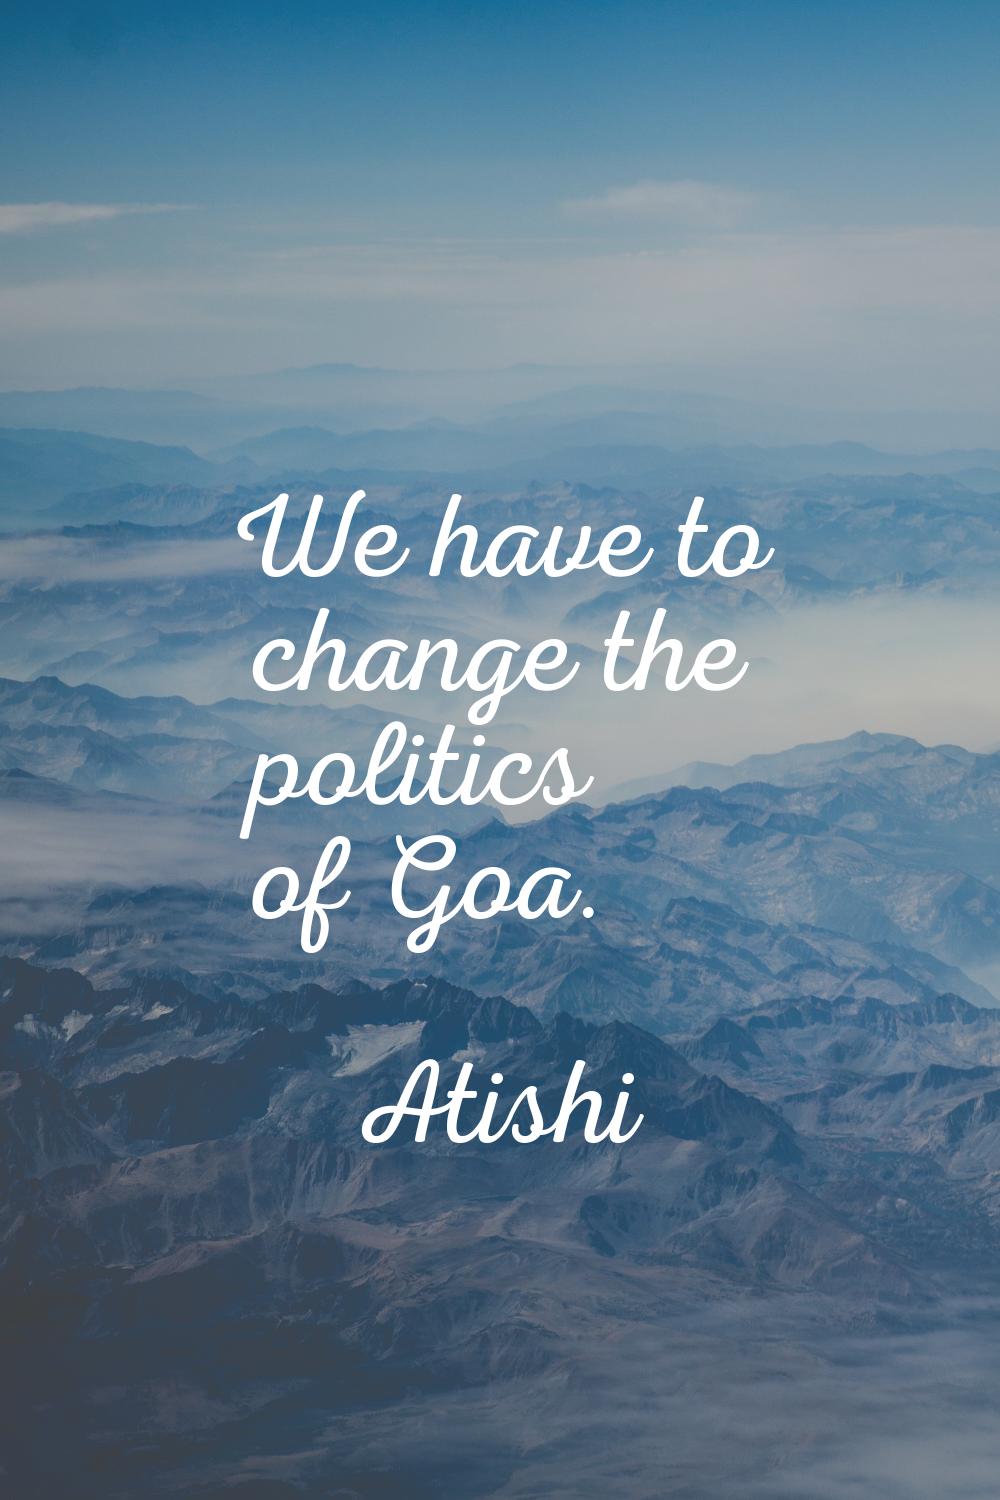 We have to change the politics of Goa.